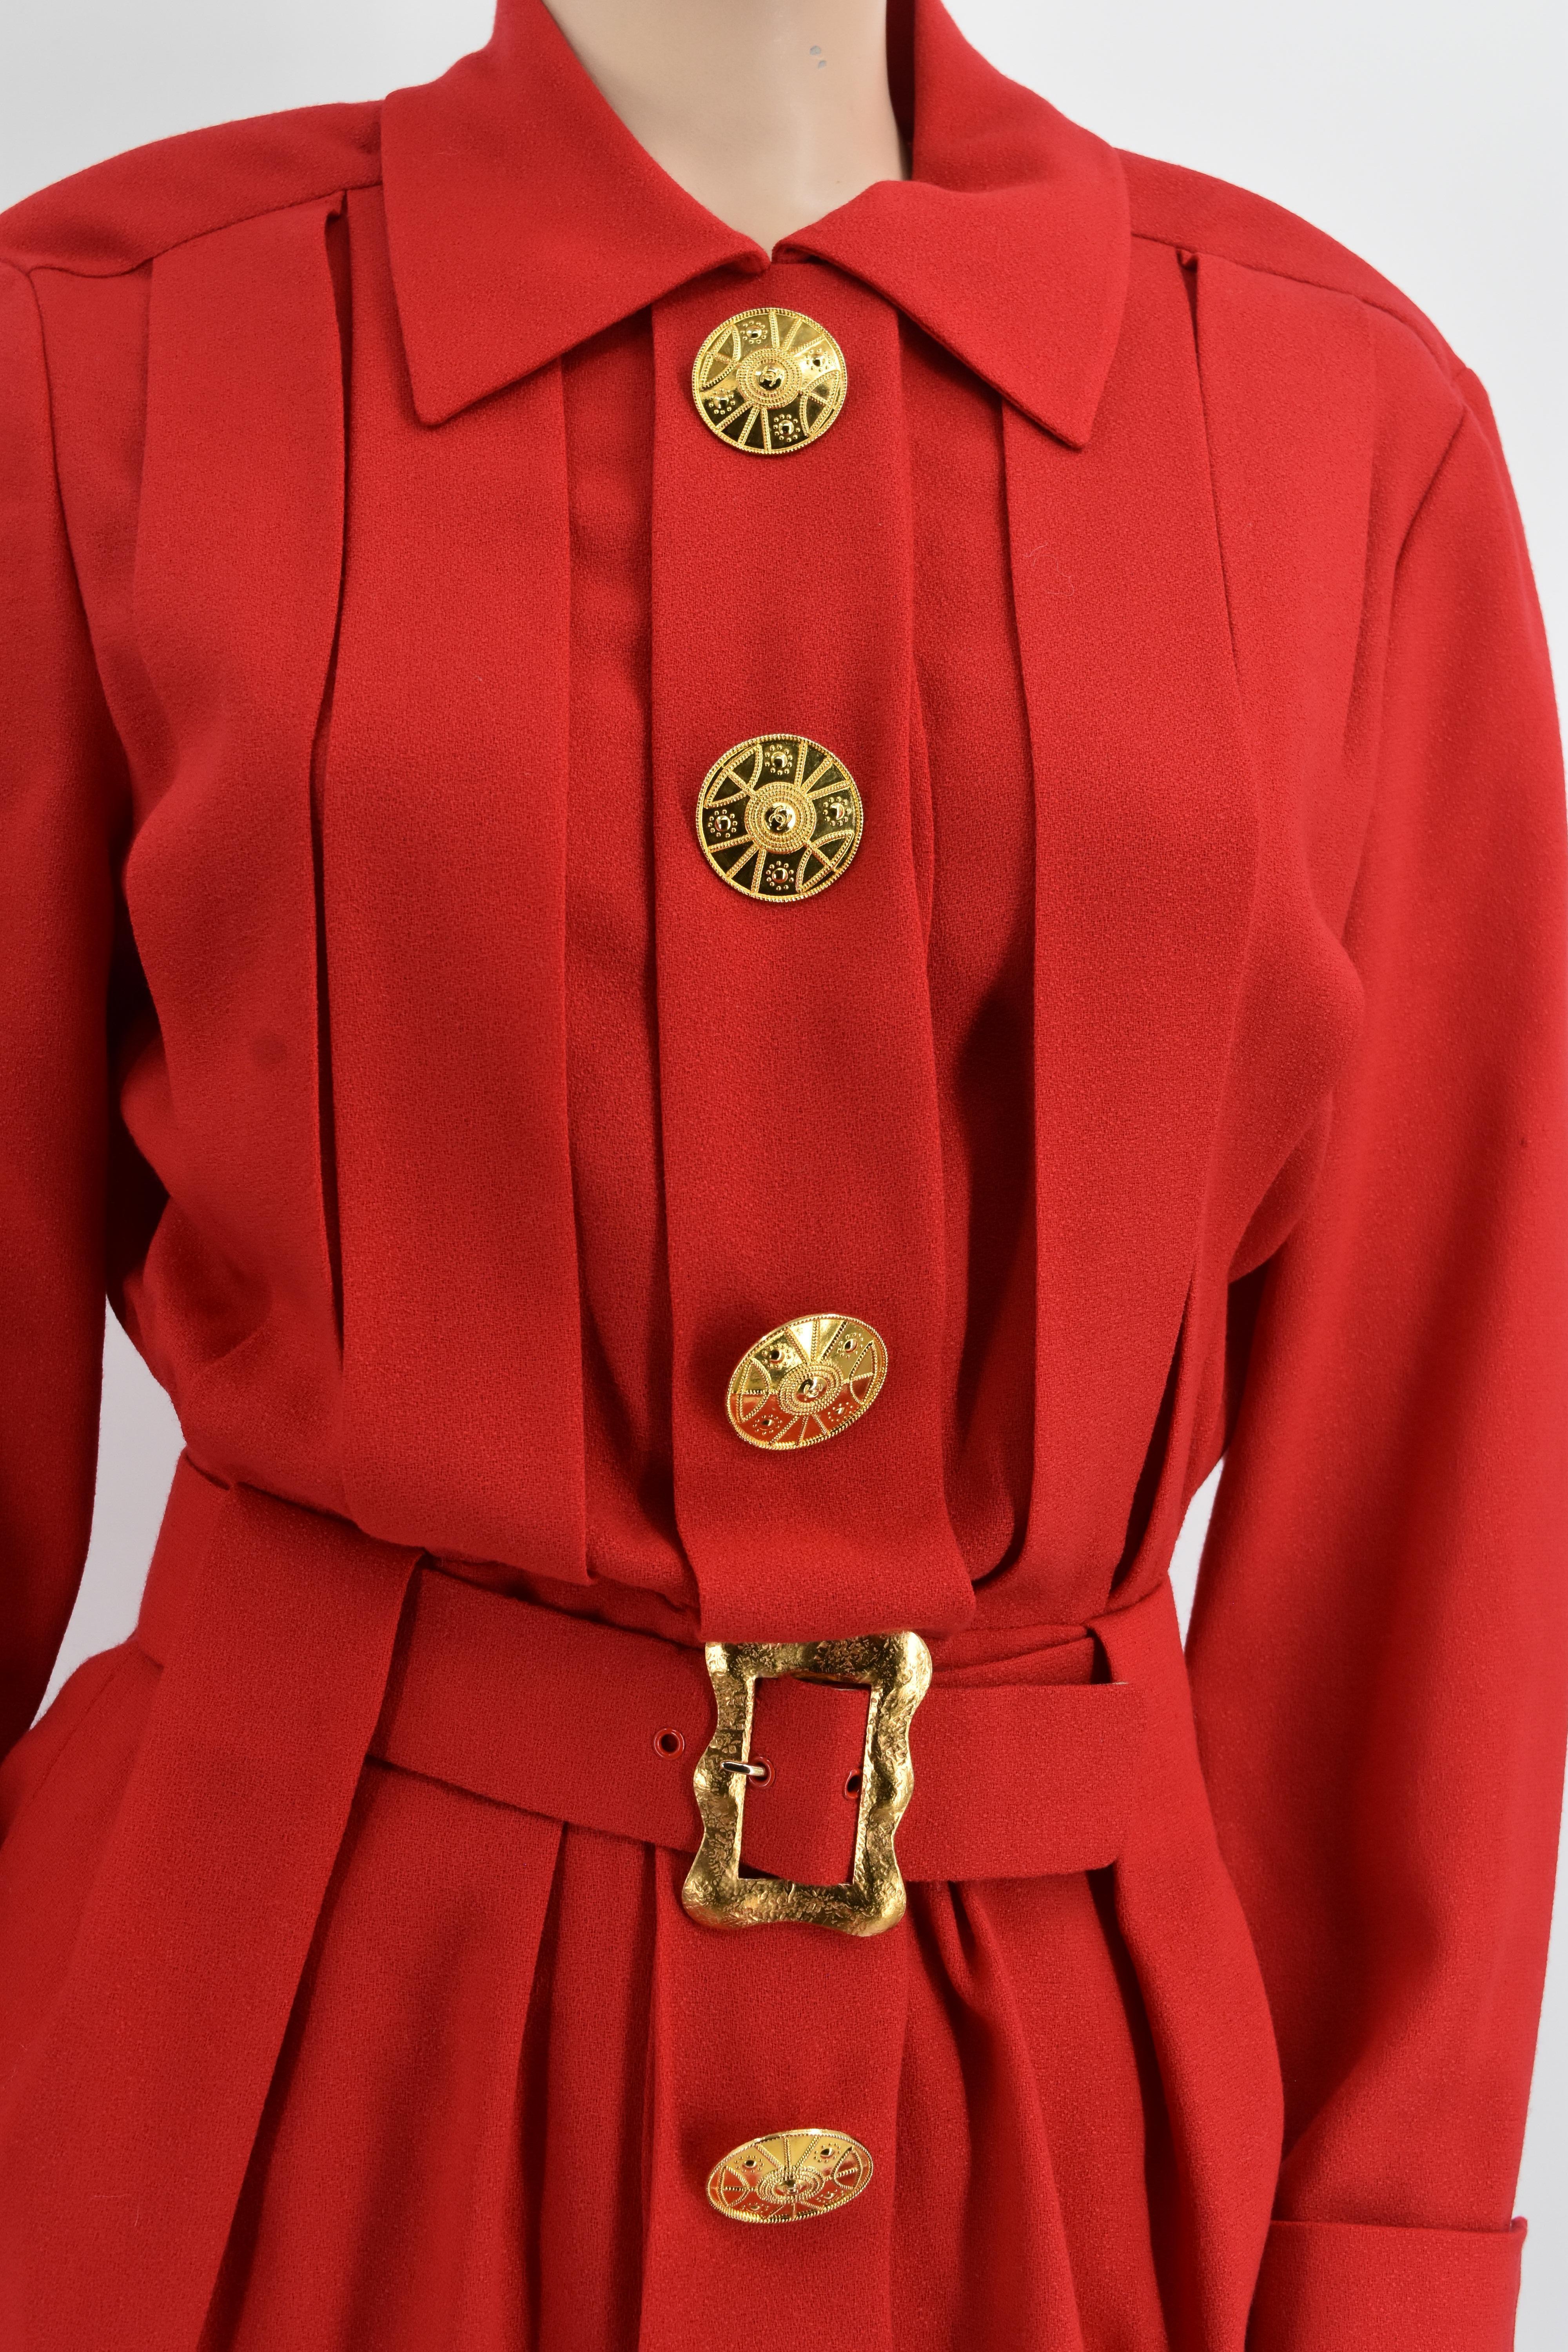 Chanel Boutique elegant red dress adorned with unique Chanel buttons. It is in mint condition.